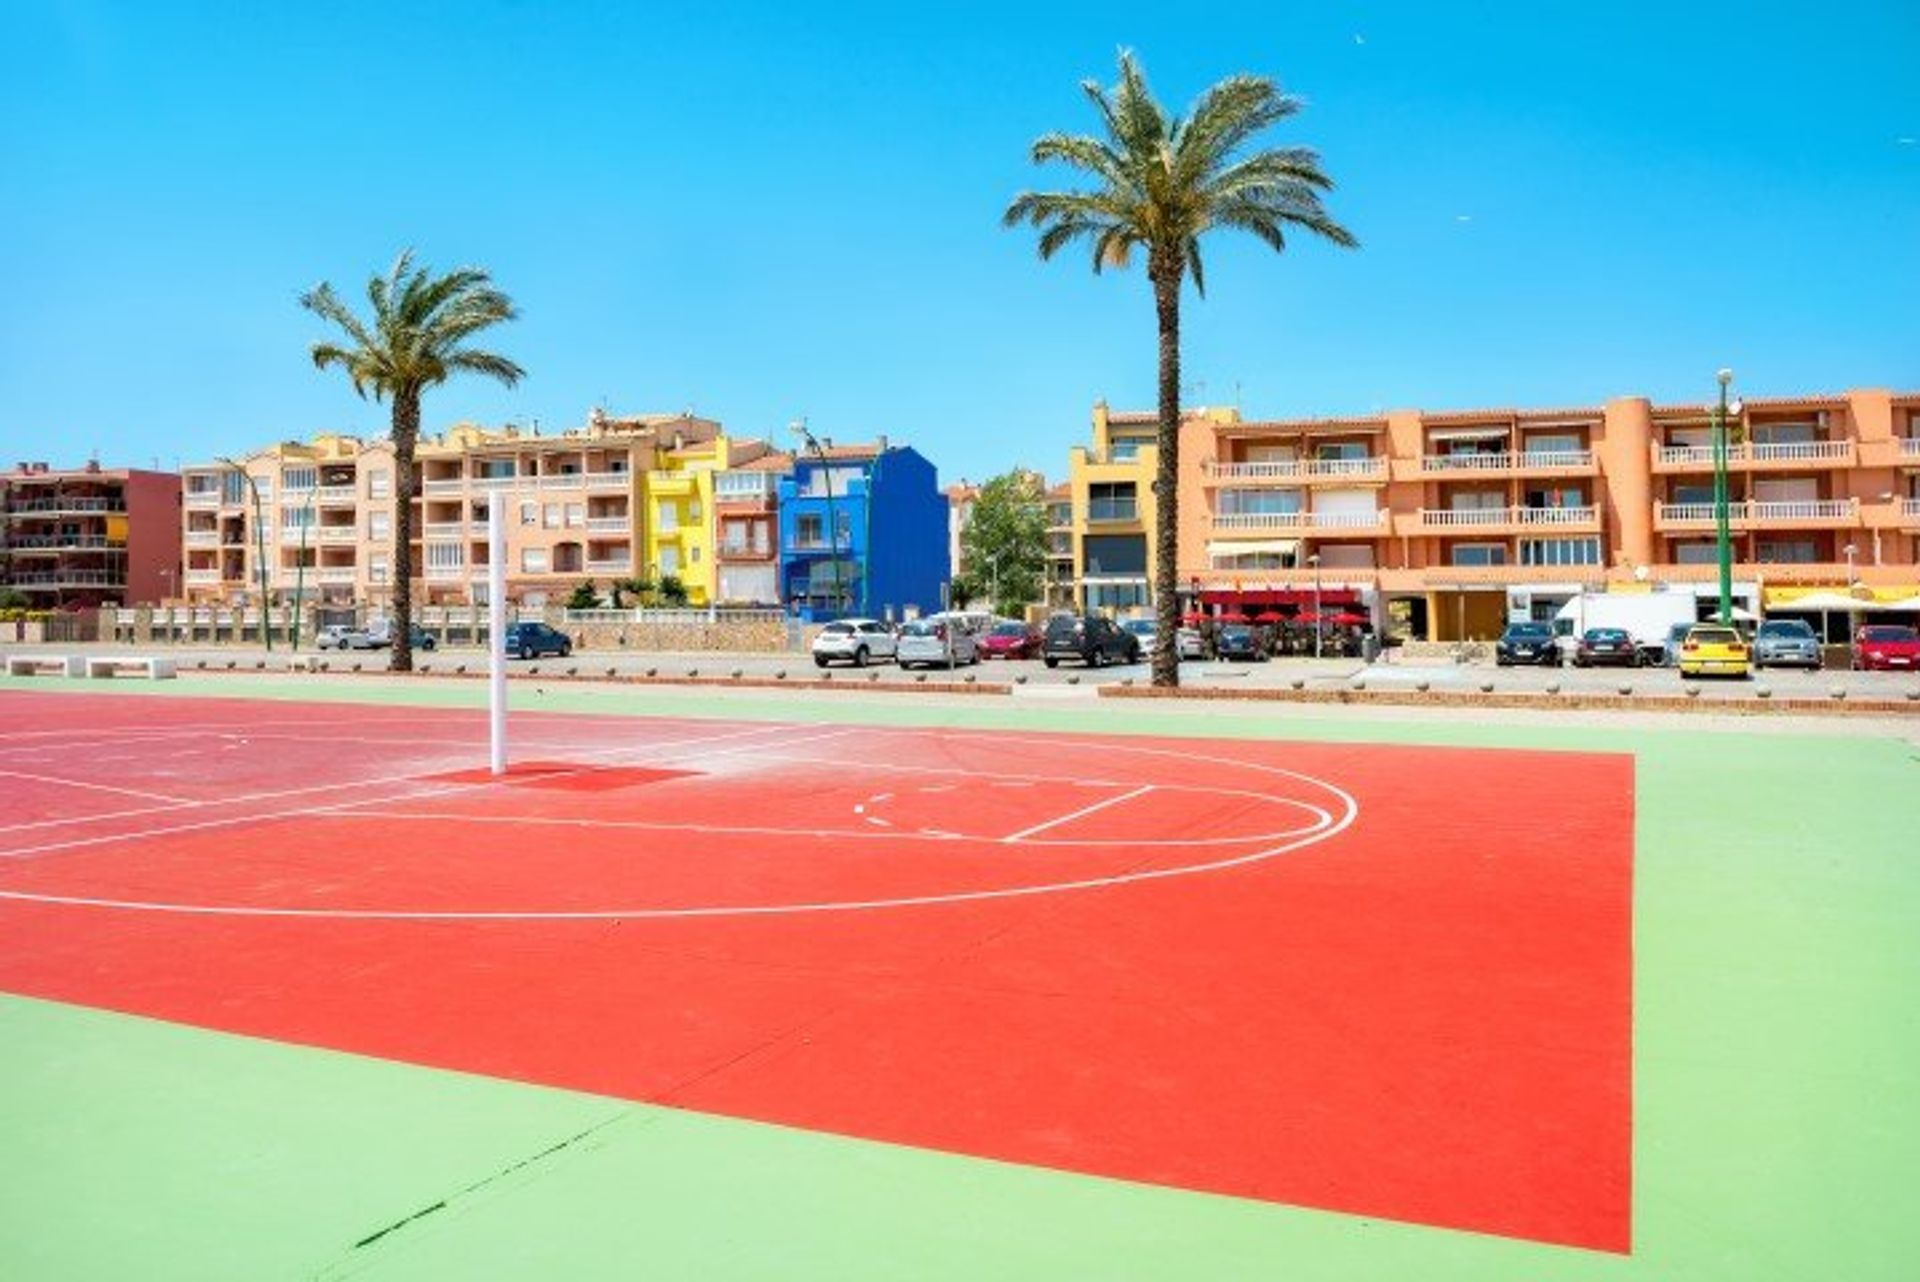 Kids will love Empriabrava town's colourful sports ground, with its modern basketball court